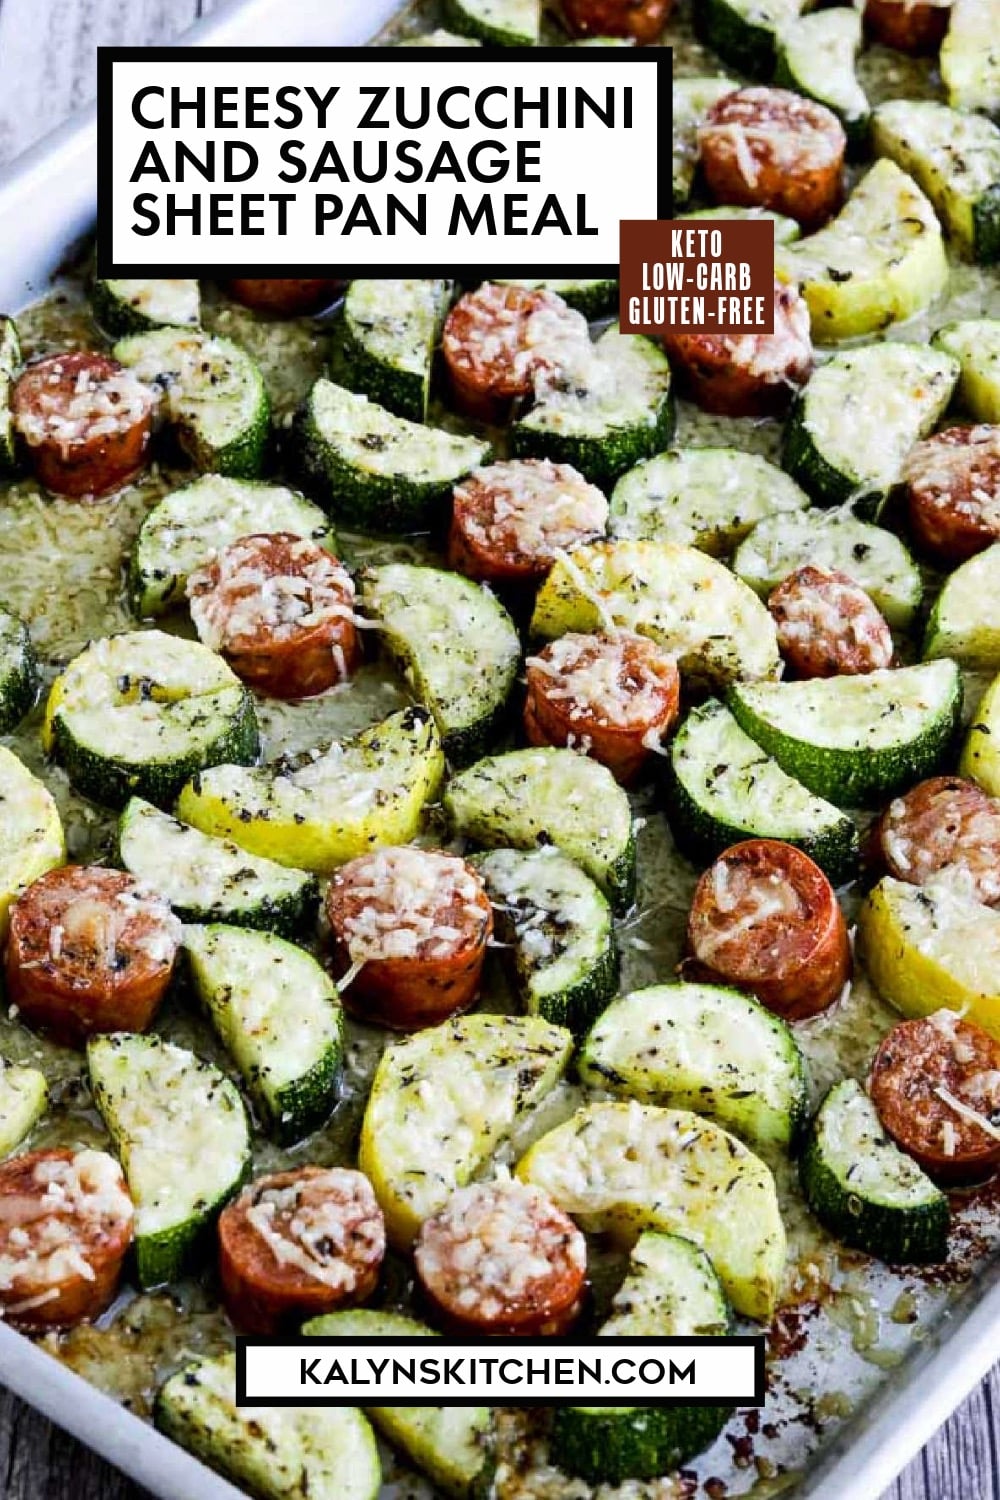 Pinterest image of Cheesy Zucchini and Sausage Sheet Pan Meal